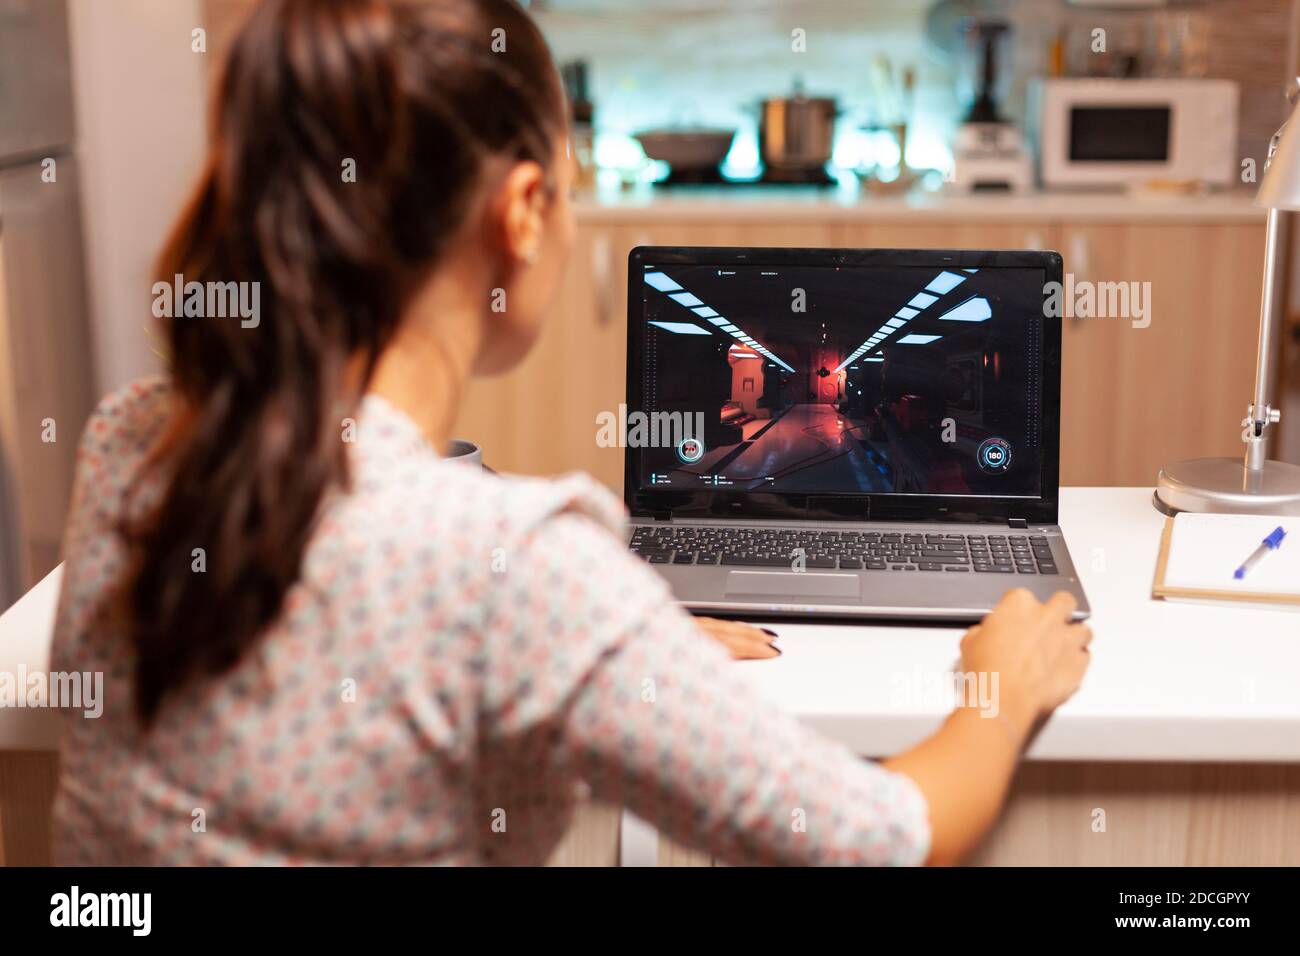 Lady playing games on laptop during night time during night time in home kitchen. Professional gamer playing online videop games on her personal computer. Geek cyber e-sport. Stock Photo